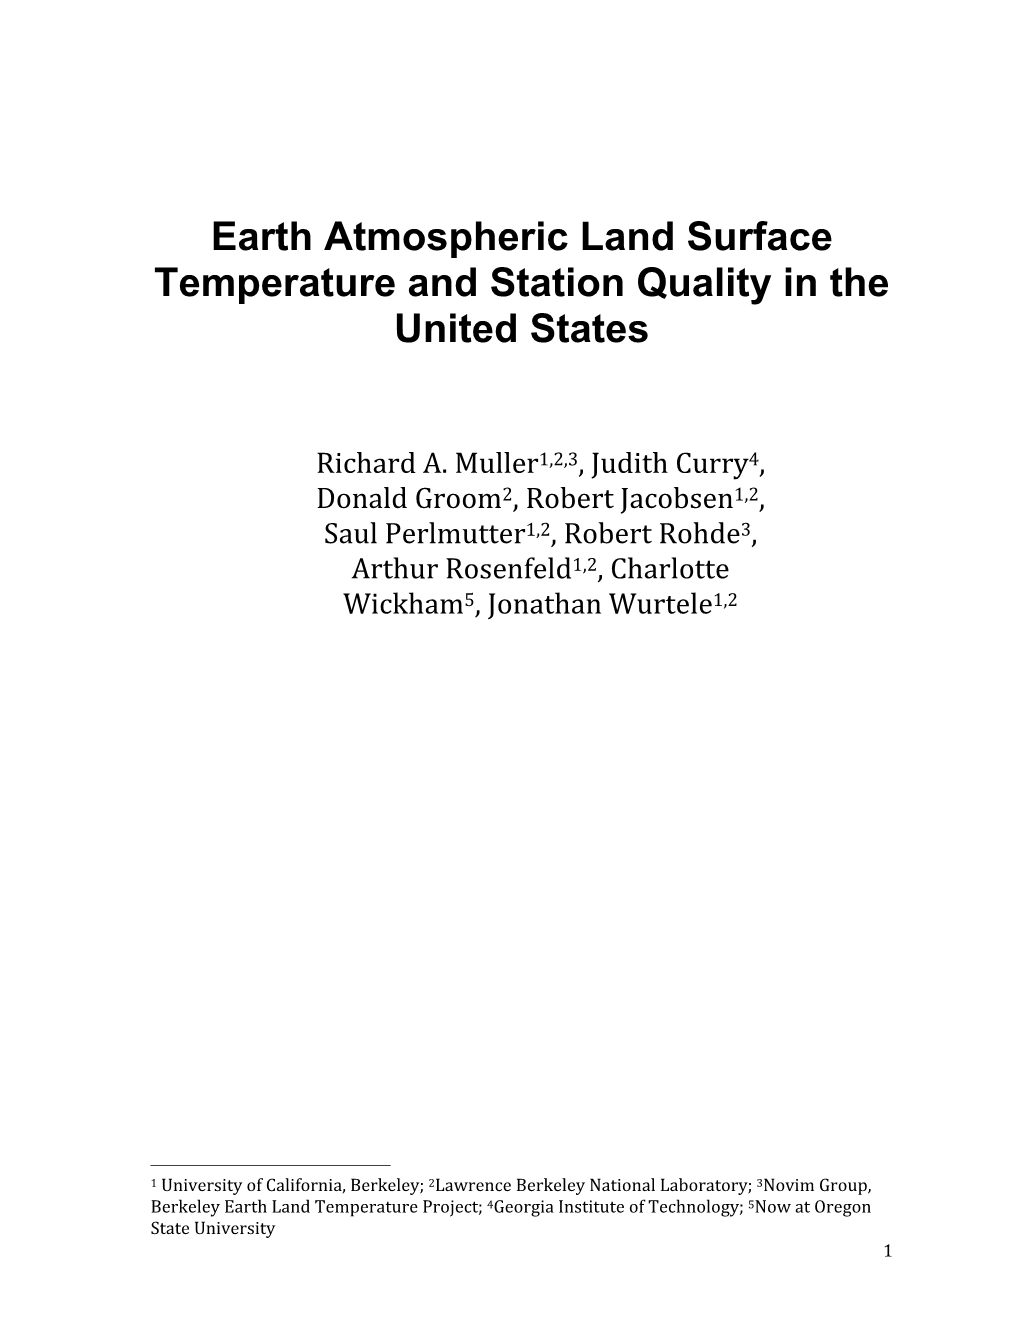 Earth Atmospheric Land Surface Temperature and Station Quality in the United States